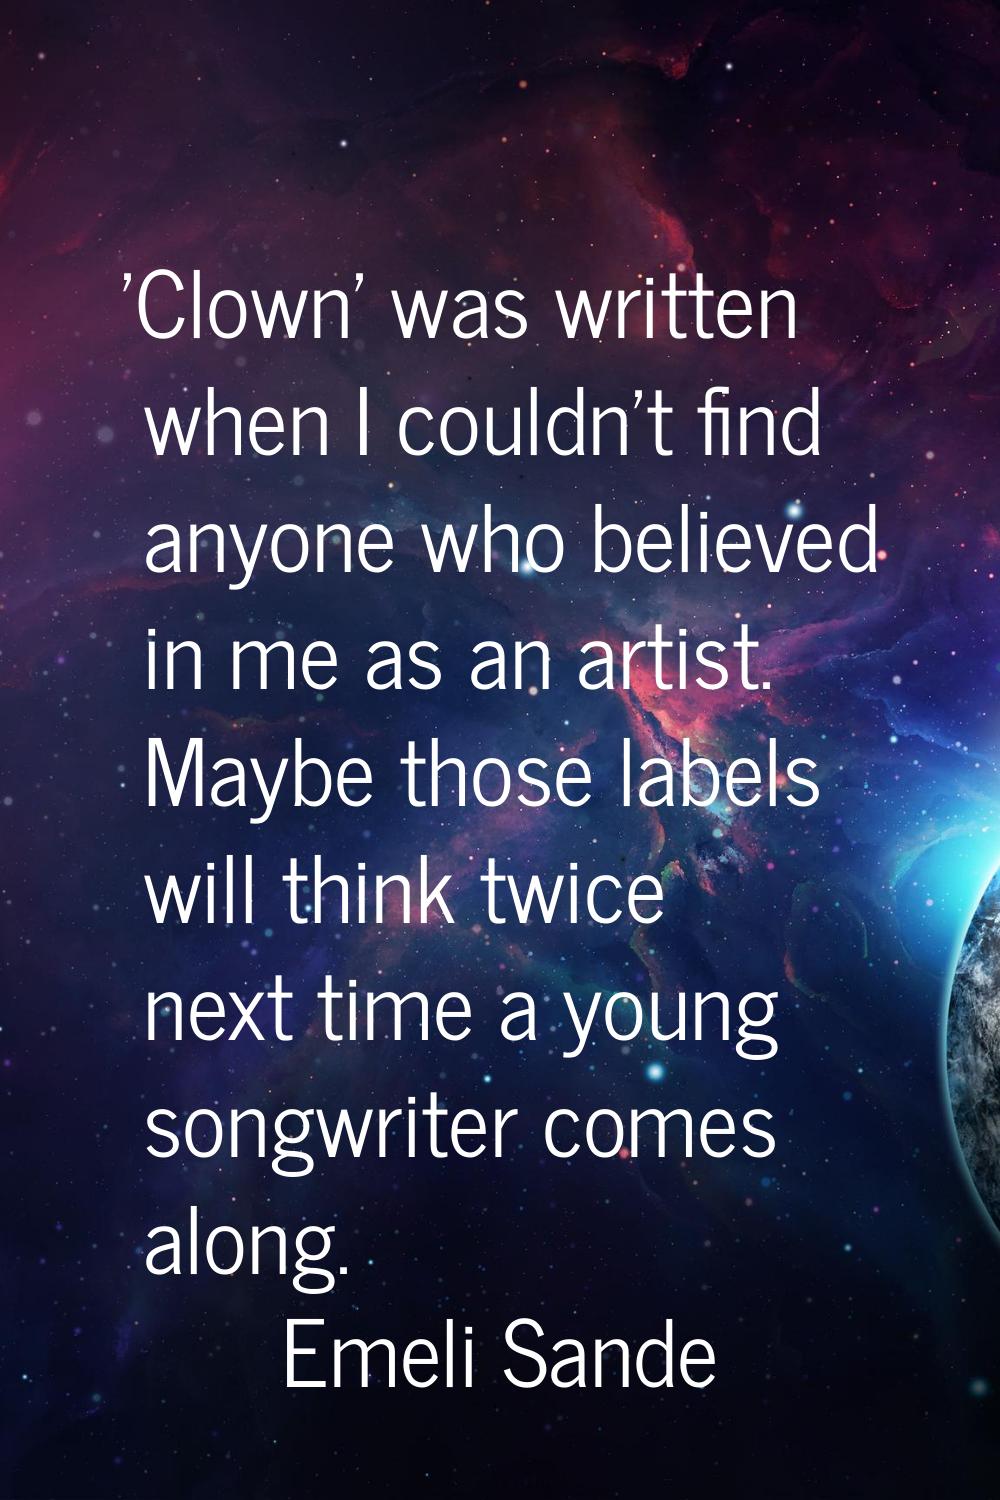 'Clown' was written when I couldn't find anyone who believed in me as an artist. Maybe those labels